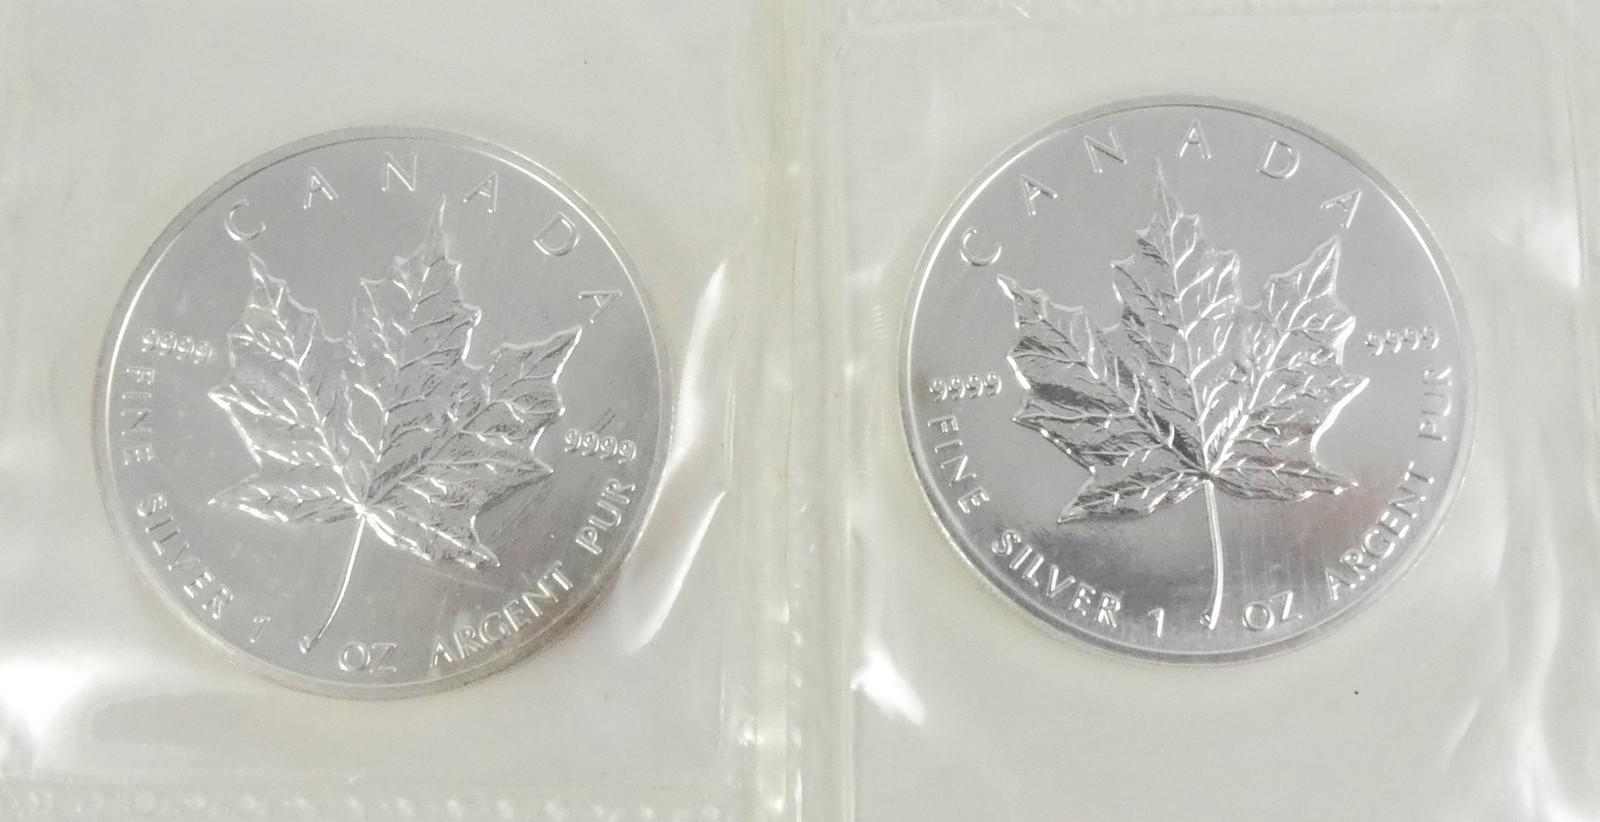 2 CANADIAN "MAPLE LEAF" COINS